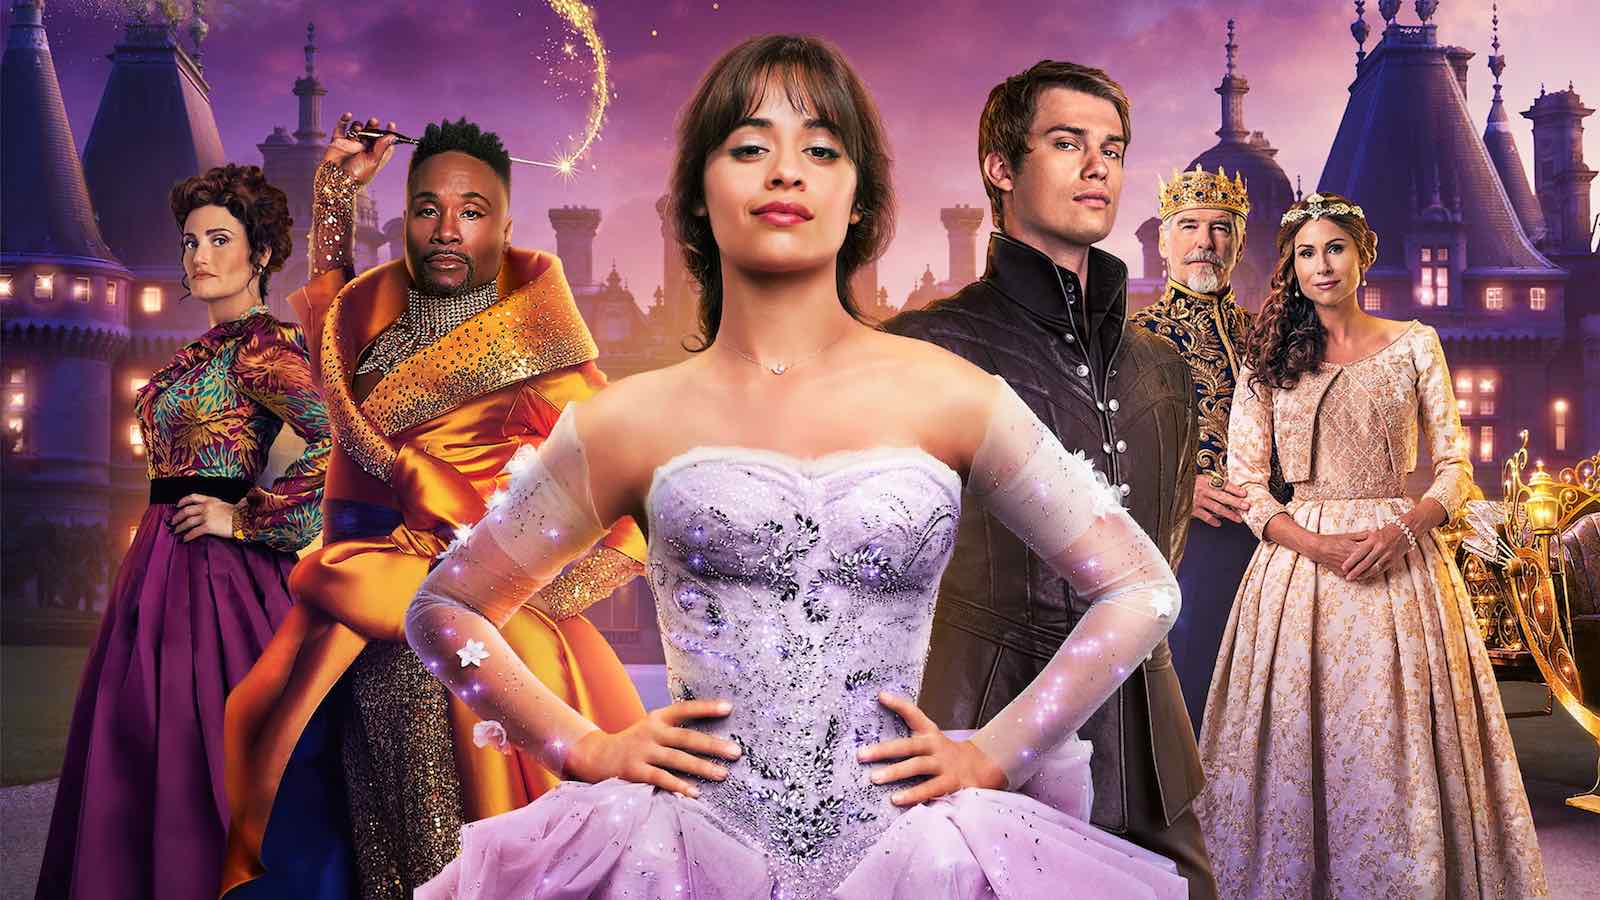 Why are people saying Camila Cabello's new 'Cinderella' movie is awful